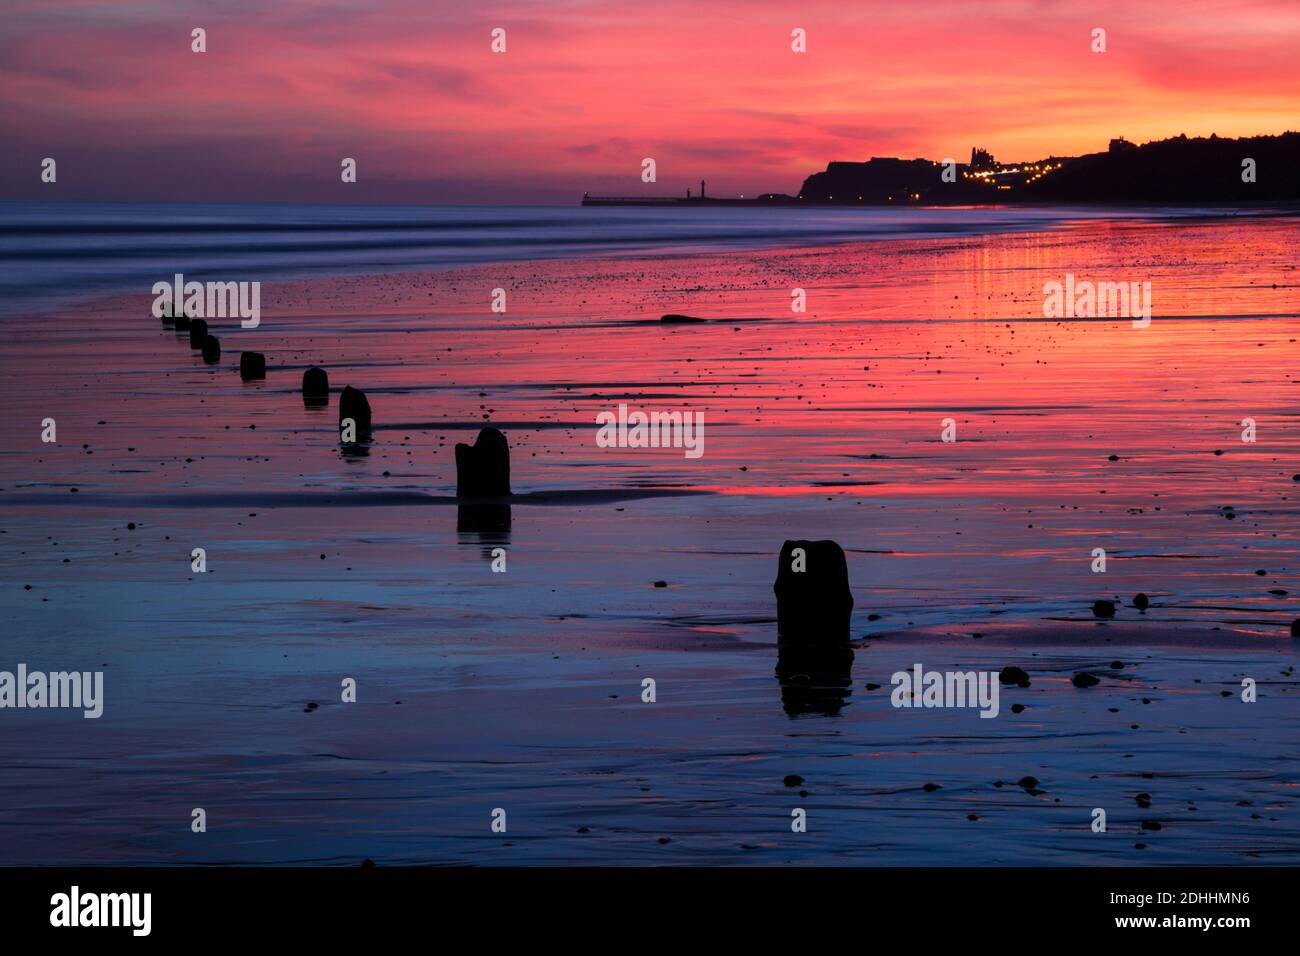 Daybreak view looking towards Whitby showing pier, town and abbey in silhouette against a colourful sky reflected on wet sand.  Viewed from Sandsend. Stock Photo